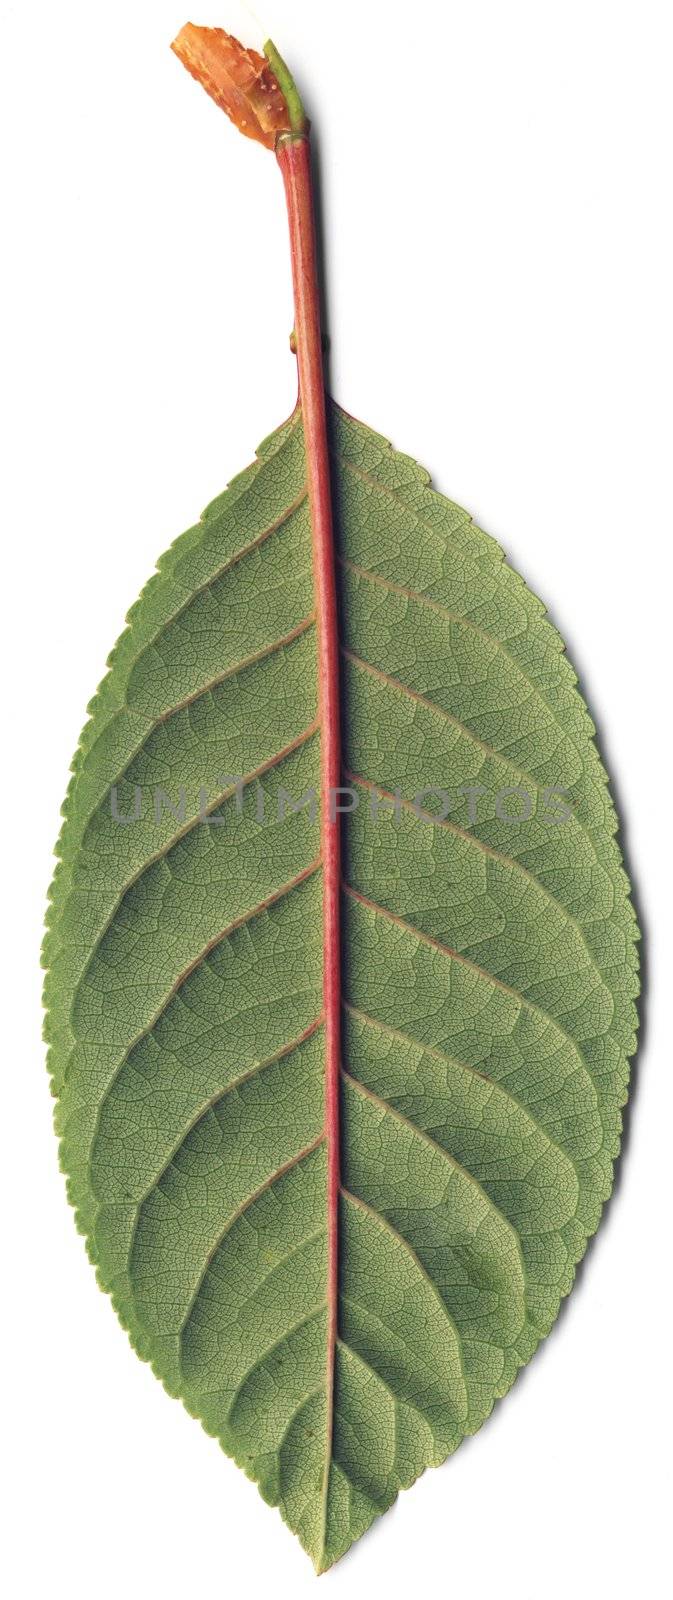 The green leaf of cherry with foliage